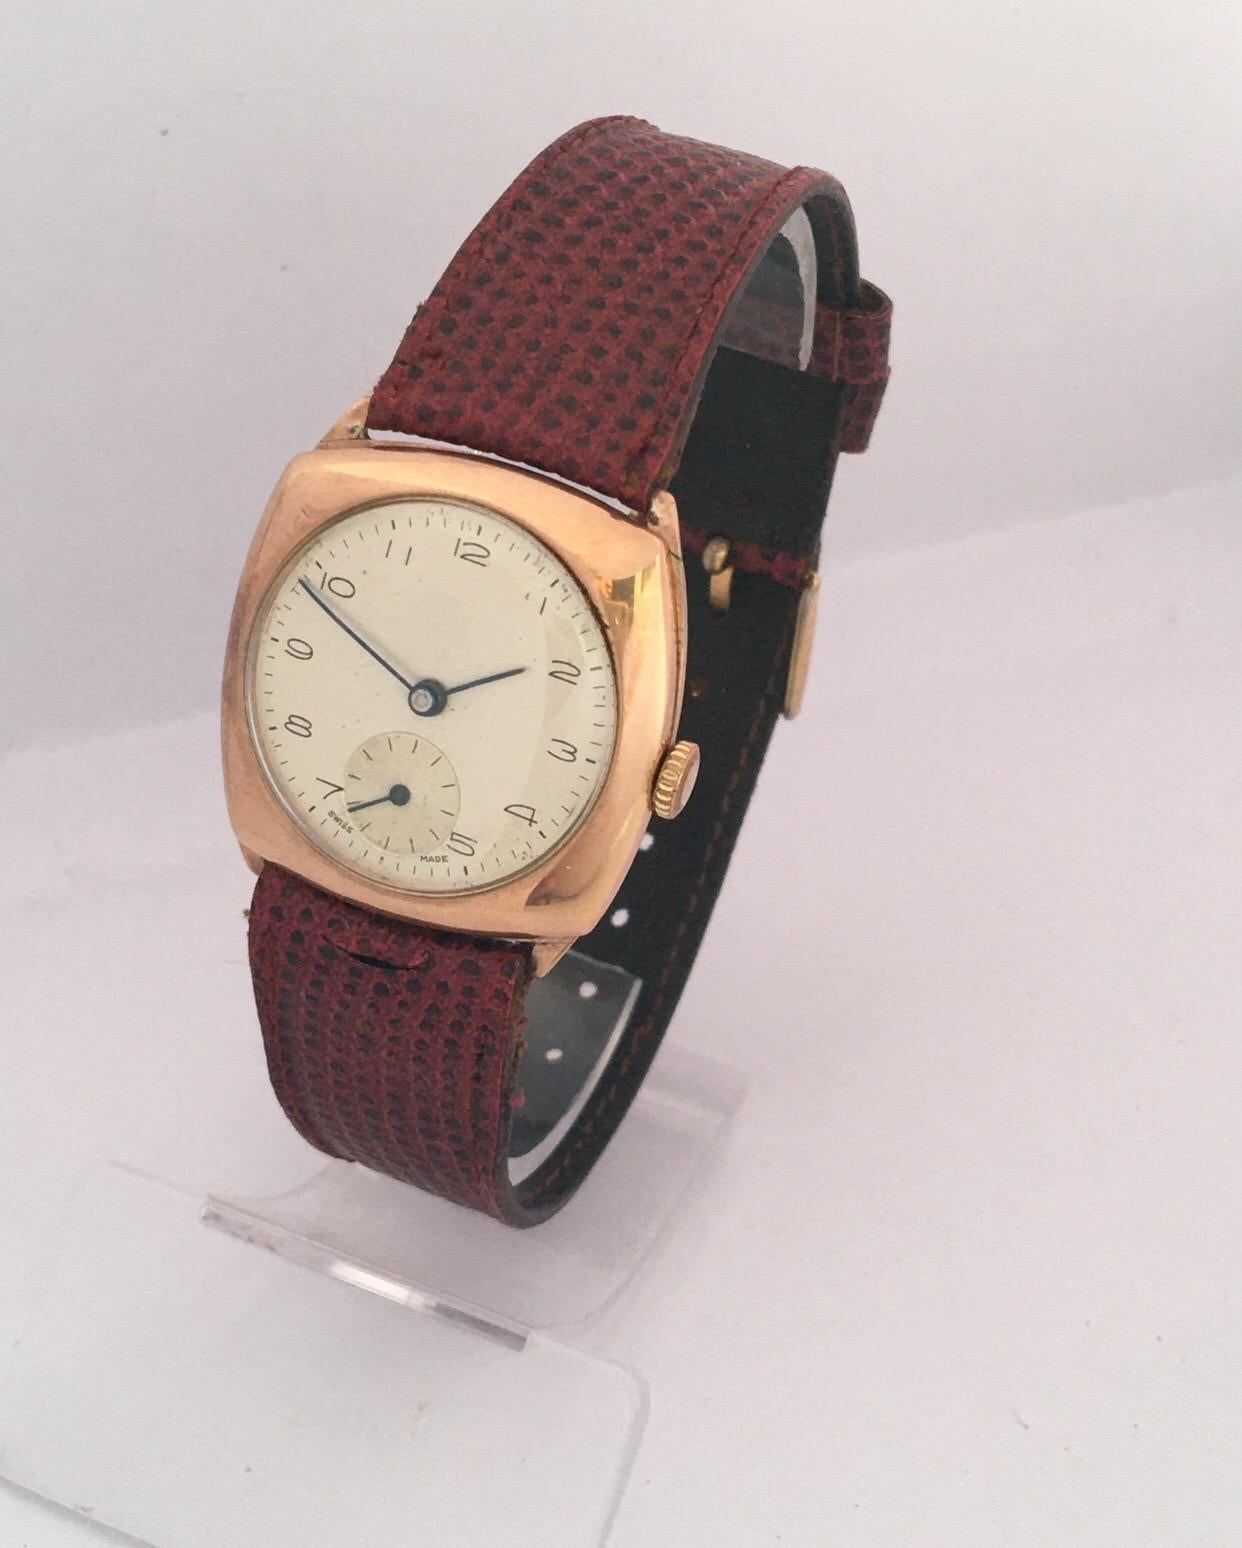 This beautiful vintage hand winding gold watch is in good working condition and it is running well. Visible signs of ageing and wear with small light marks on the watch case as shown. The red leather strap is a bit worn as shown. Please study the